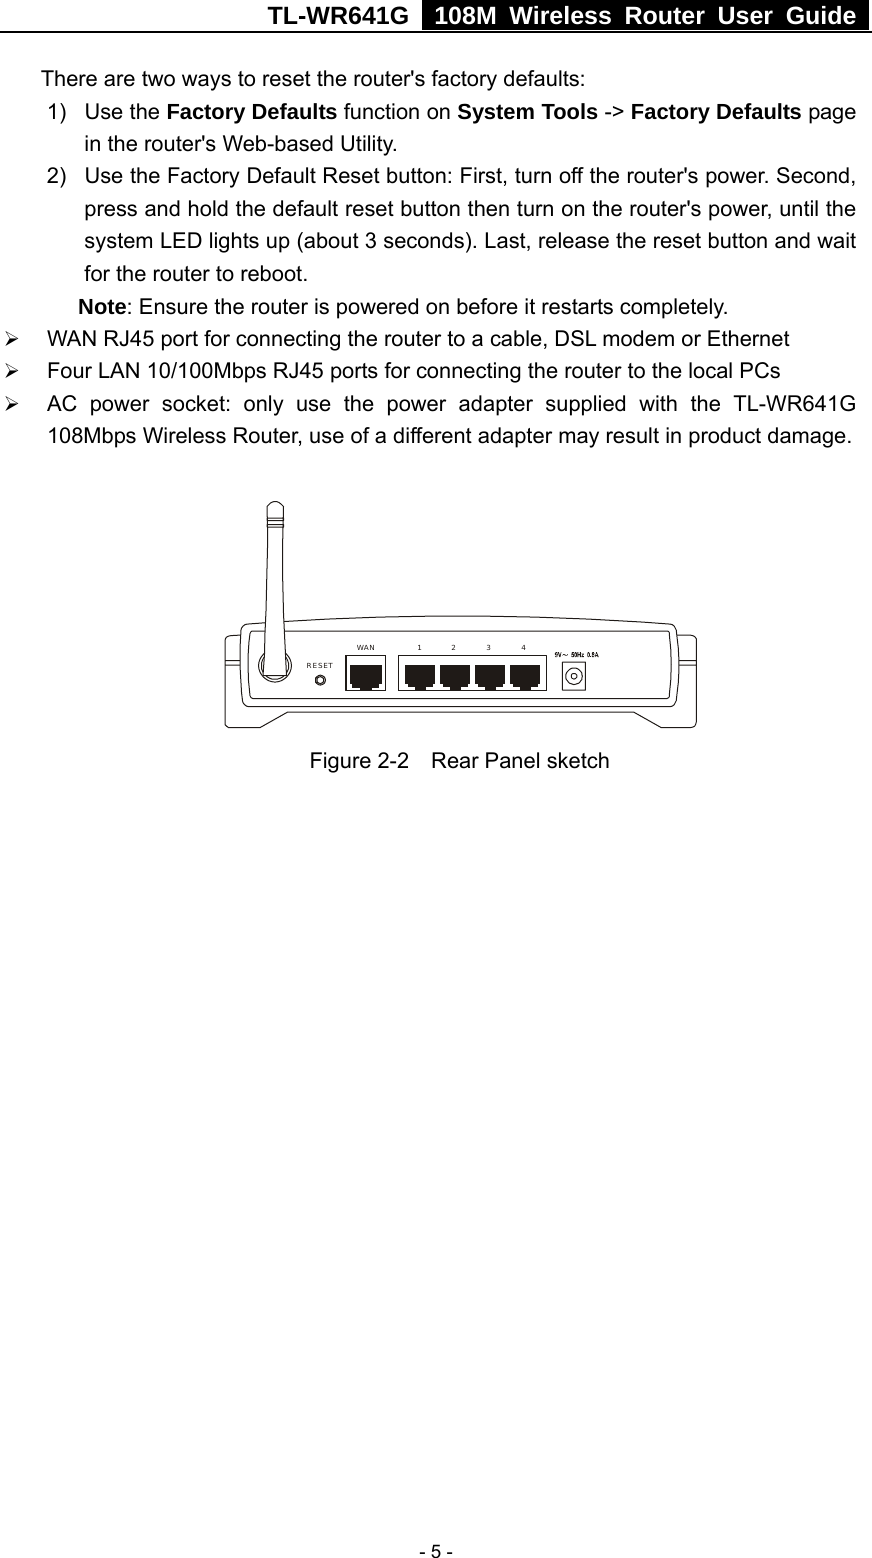 TL-WR641G   108M Wireless Router User Guide   - 5 -There are two ways to reset the router&apos;s factory defaults: 1) Use the Factory Defaults function on System Tools -&gt; Factory Defaults page in the router&apos;s Web-based Utility. 2)  Use the Factory Default Reset button: First, turn off the router&apos;s power. Second, press and hold the default reset button then turn on the router&apos;s power, until the system LED lights up (about 3 seconds). Last, release the reset button and wait for the router to reboot. Note: Ensure the router is powered on before it restarts completely. ¾ WAN RJ45 port for connecting the router to a cable, DSL modem or Ethernet ¾ Four LAN 10/100Mbps RJ45 ports for connecting the router to the local PCs ¾ AC power socket: only use the power adapter supplied with the TL-WR641G 108Mbps Wireless Router, use of a different adapter may result in product damage.  1WAN 234RESET Figure 2-2    Rear Panel sketch 